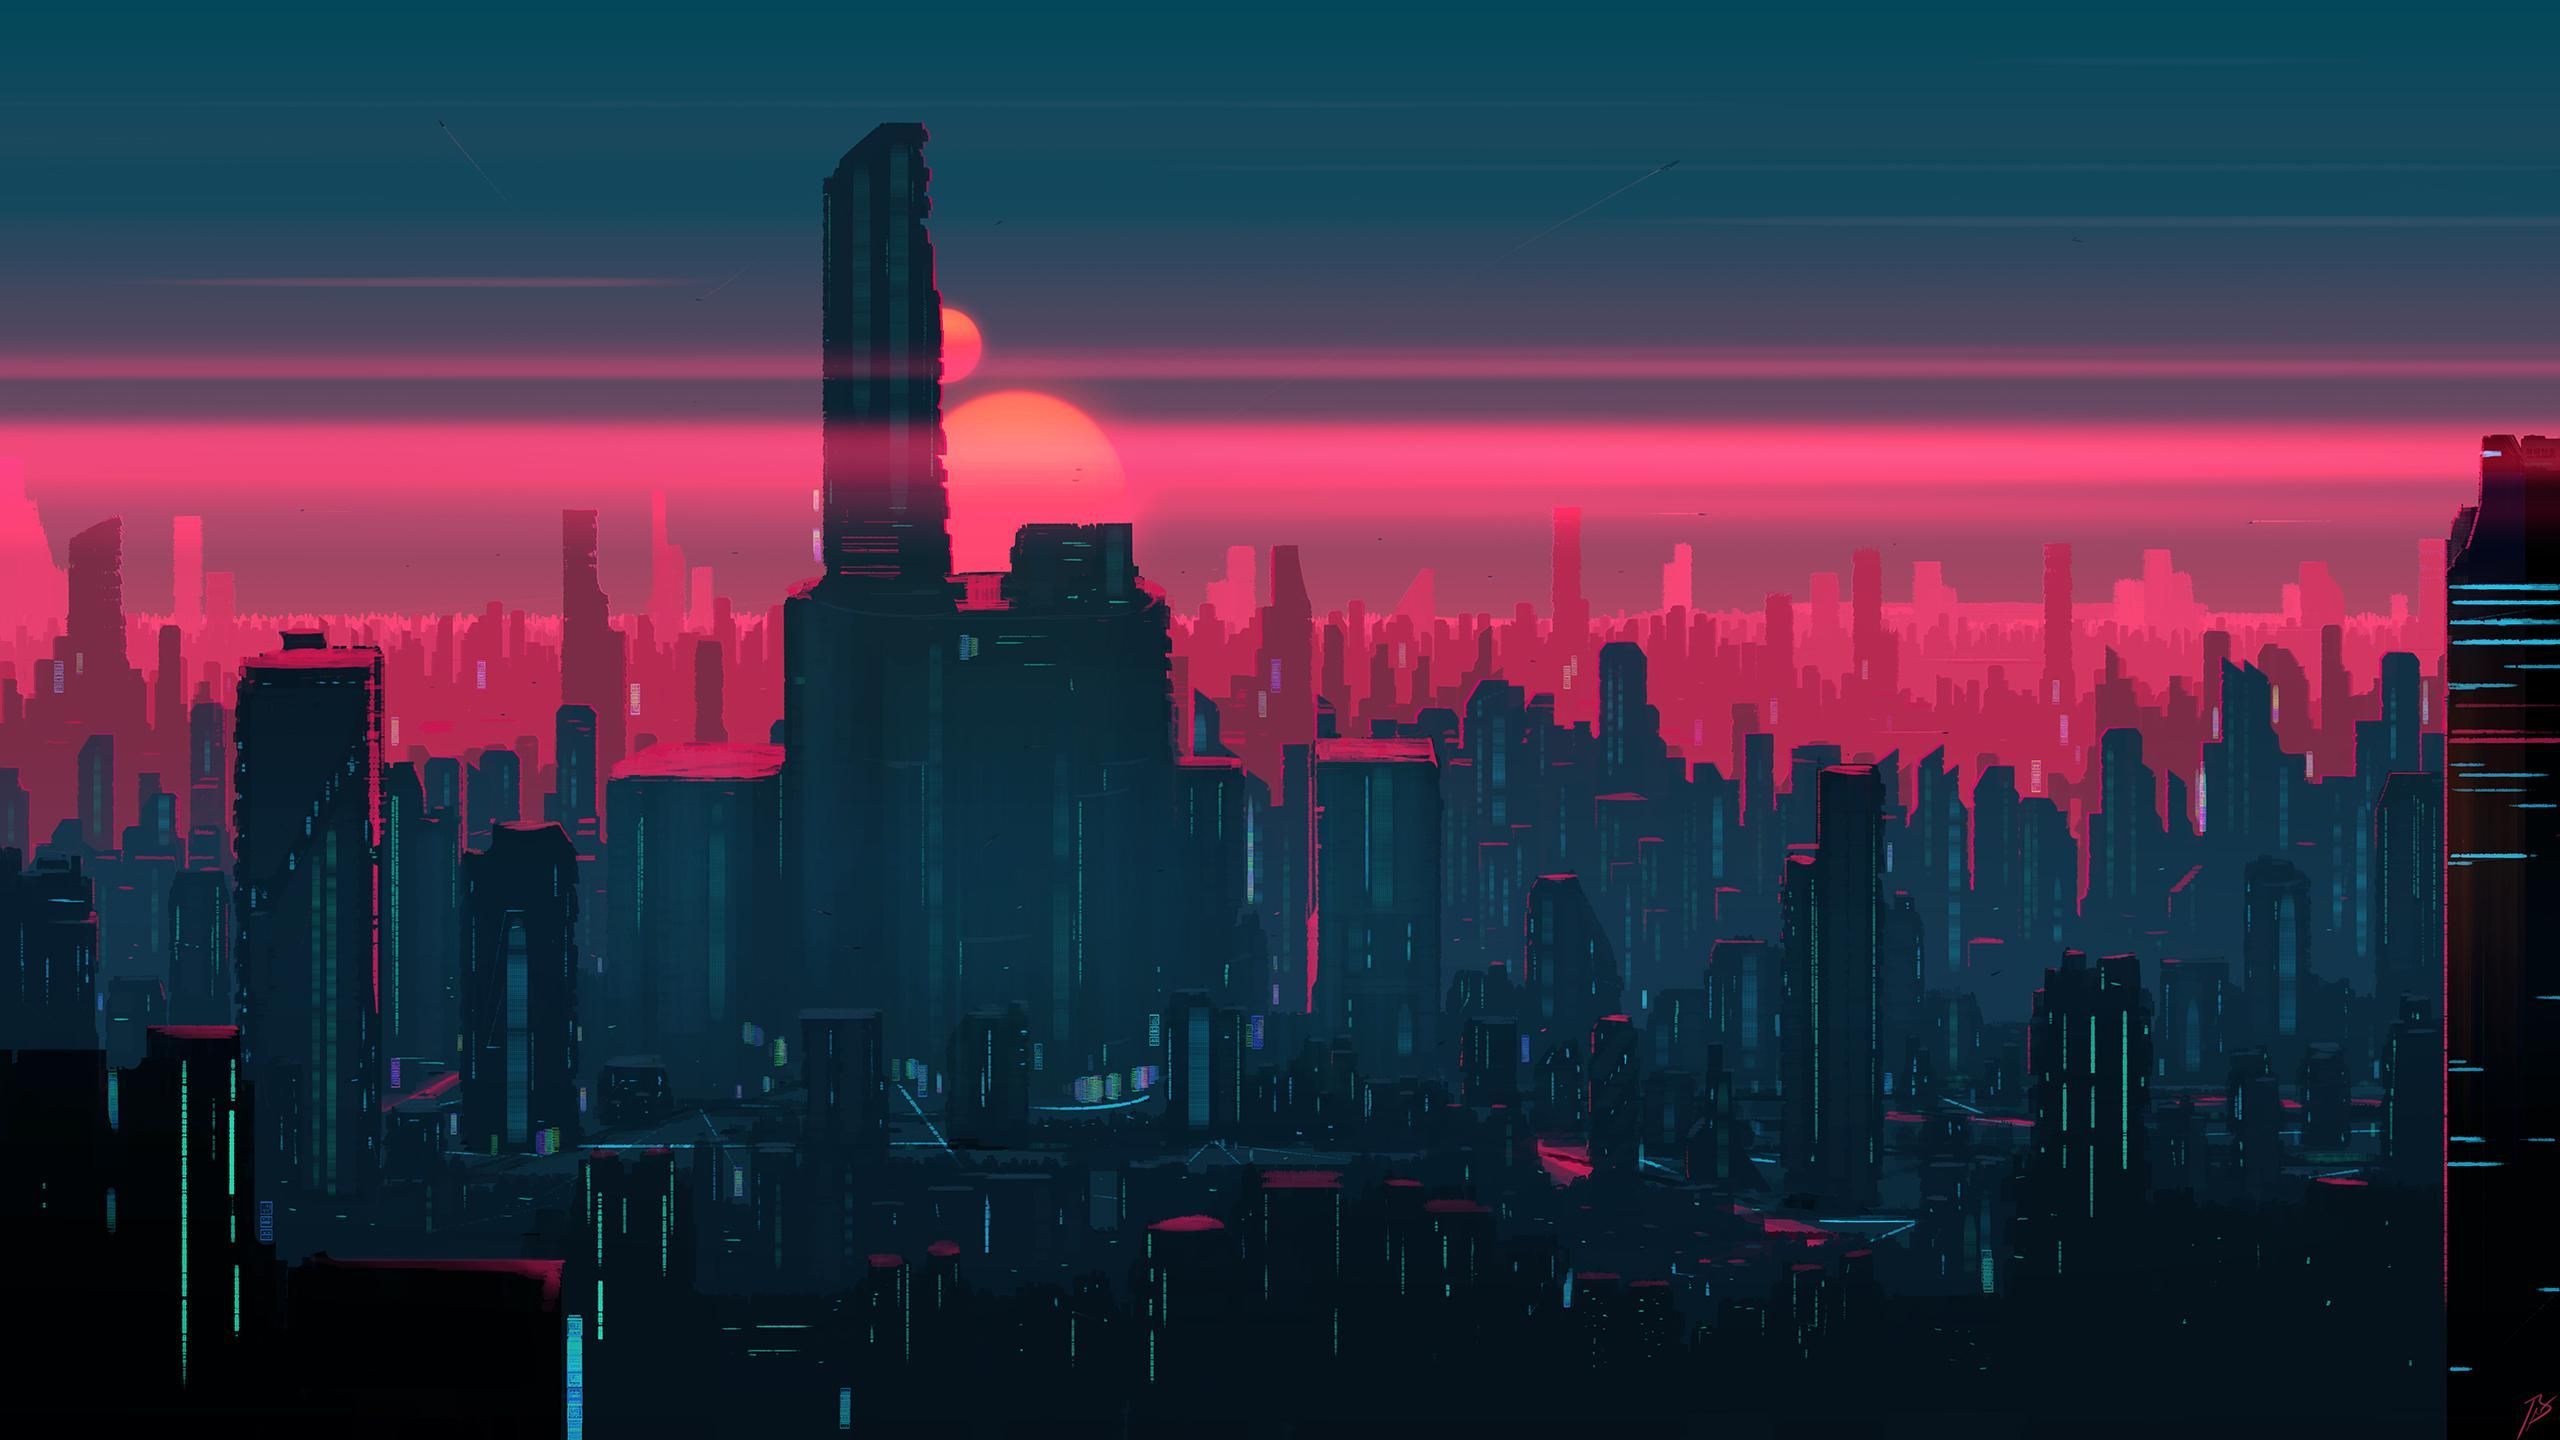 Sunset over a city aesthetic ps wallpapers